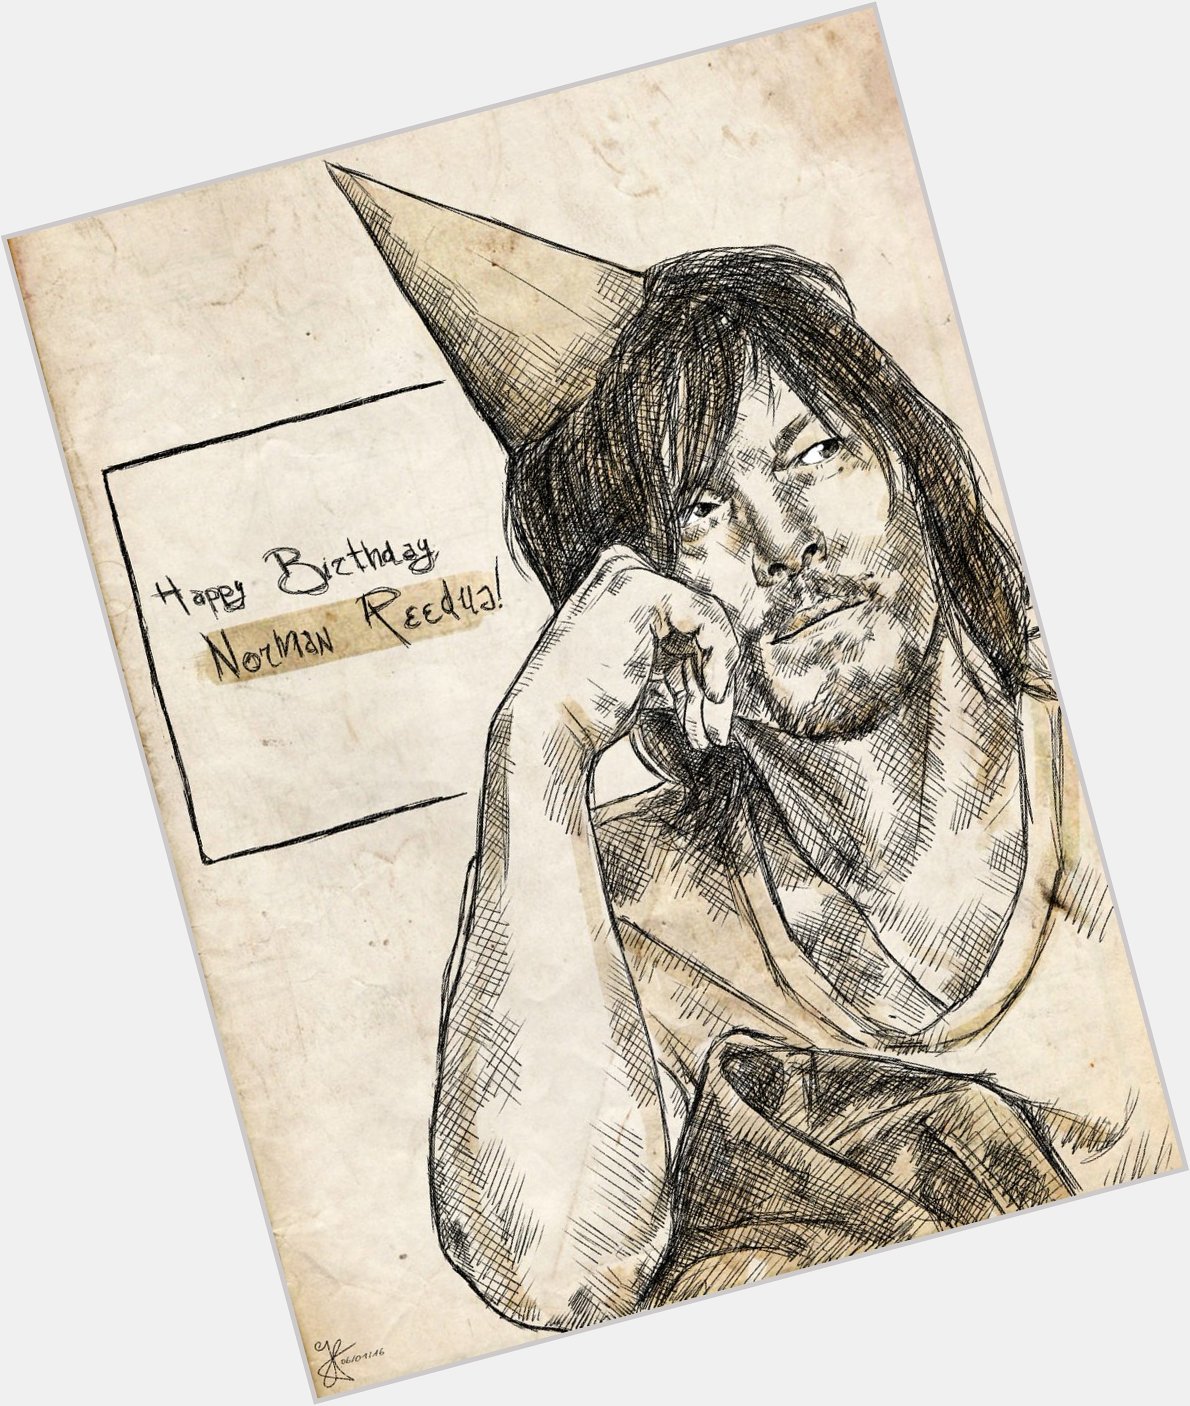 Happy Birthday, Norman Reedus!  here\s my little drawing for you. Enjoy your special day! 